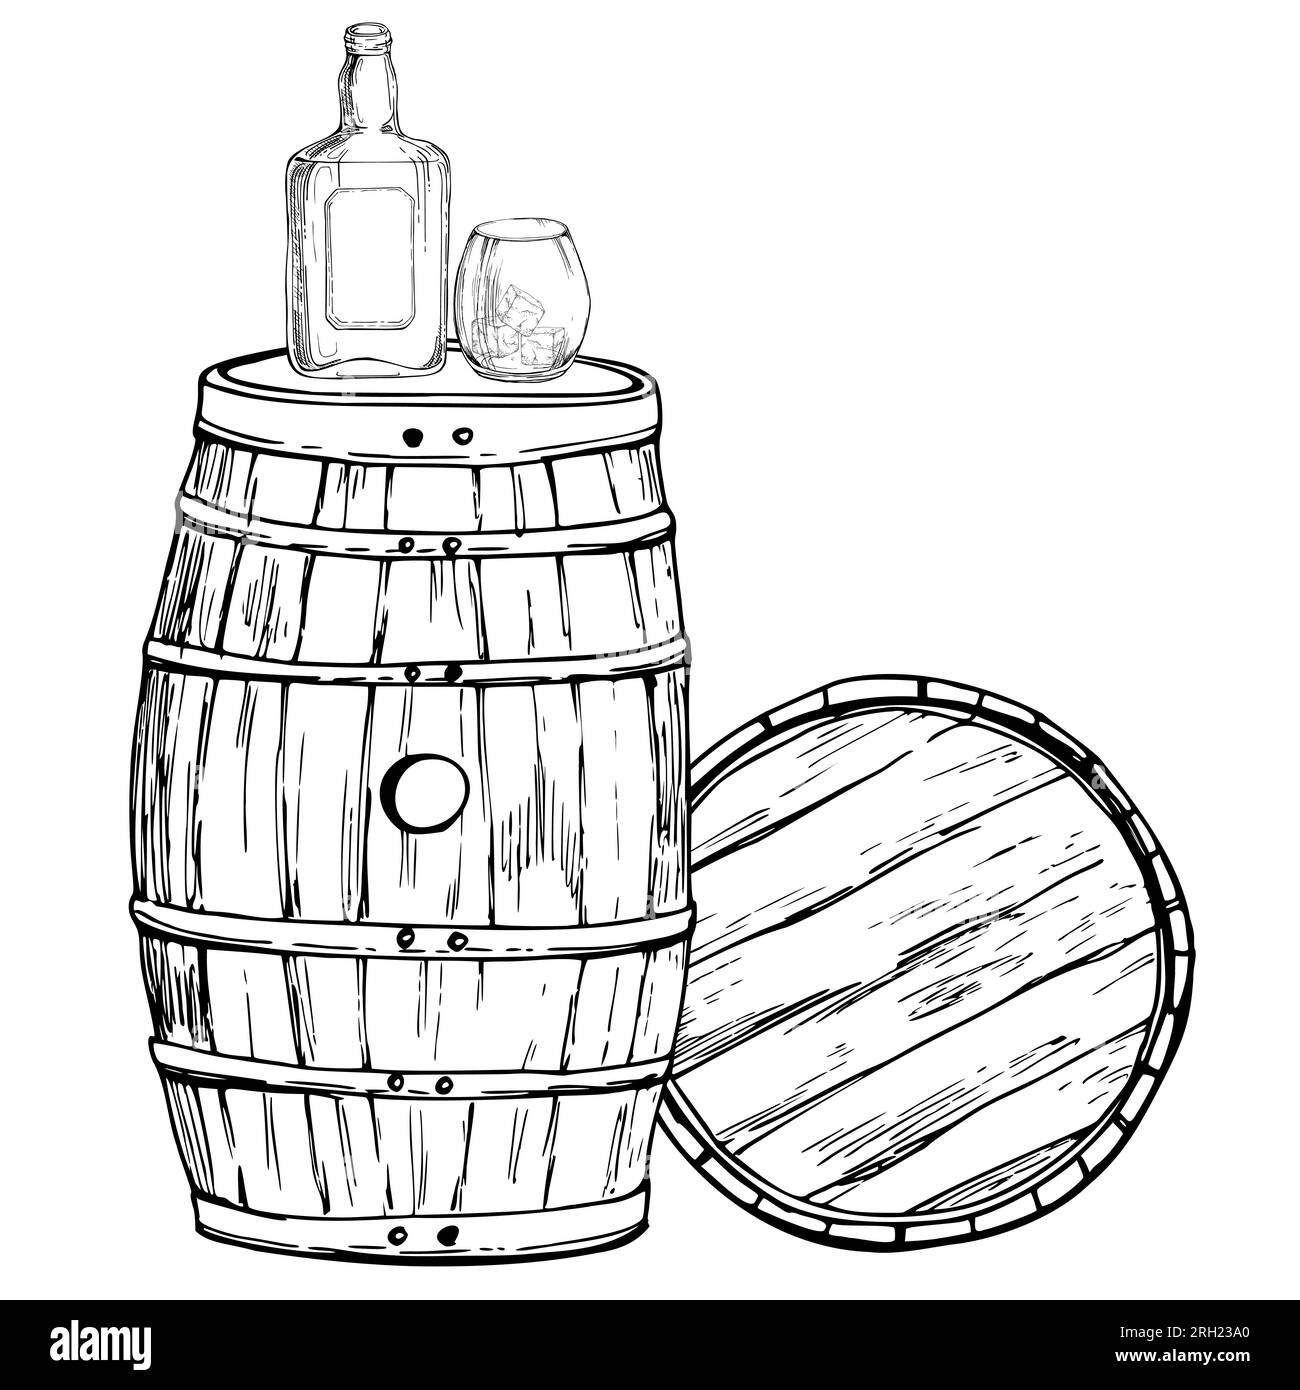 Ink hand drawn vector graphic sketch. Scotch scottish whisky whiskey wooden barrel, bottle with label and glass with rocks. Design for tourism, travel Stock Vector